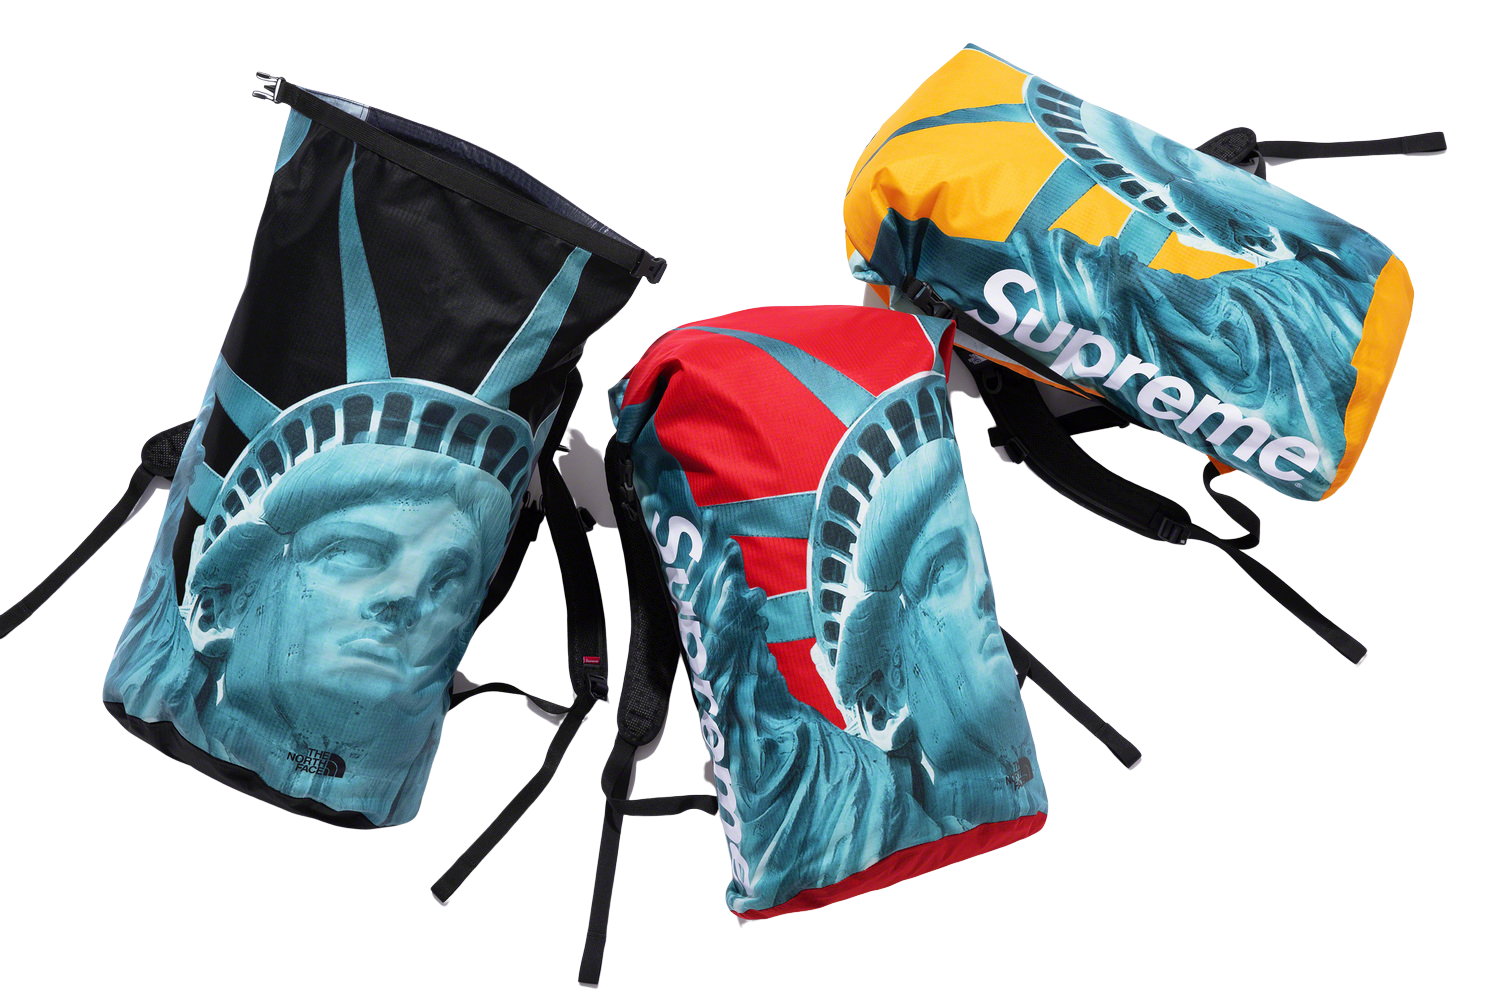 The North Face Statue of Liberty Waterproof Backpack - fall winter ...